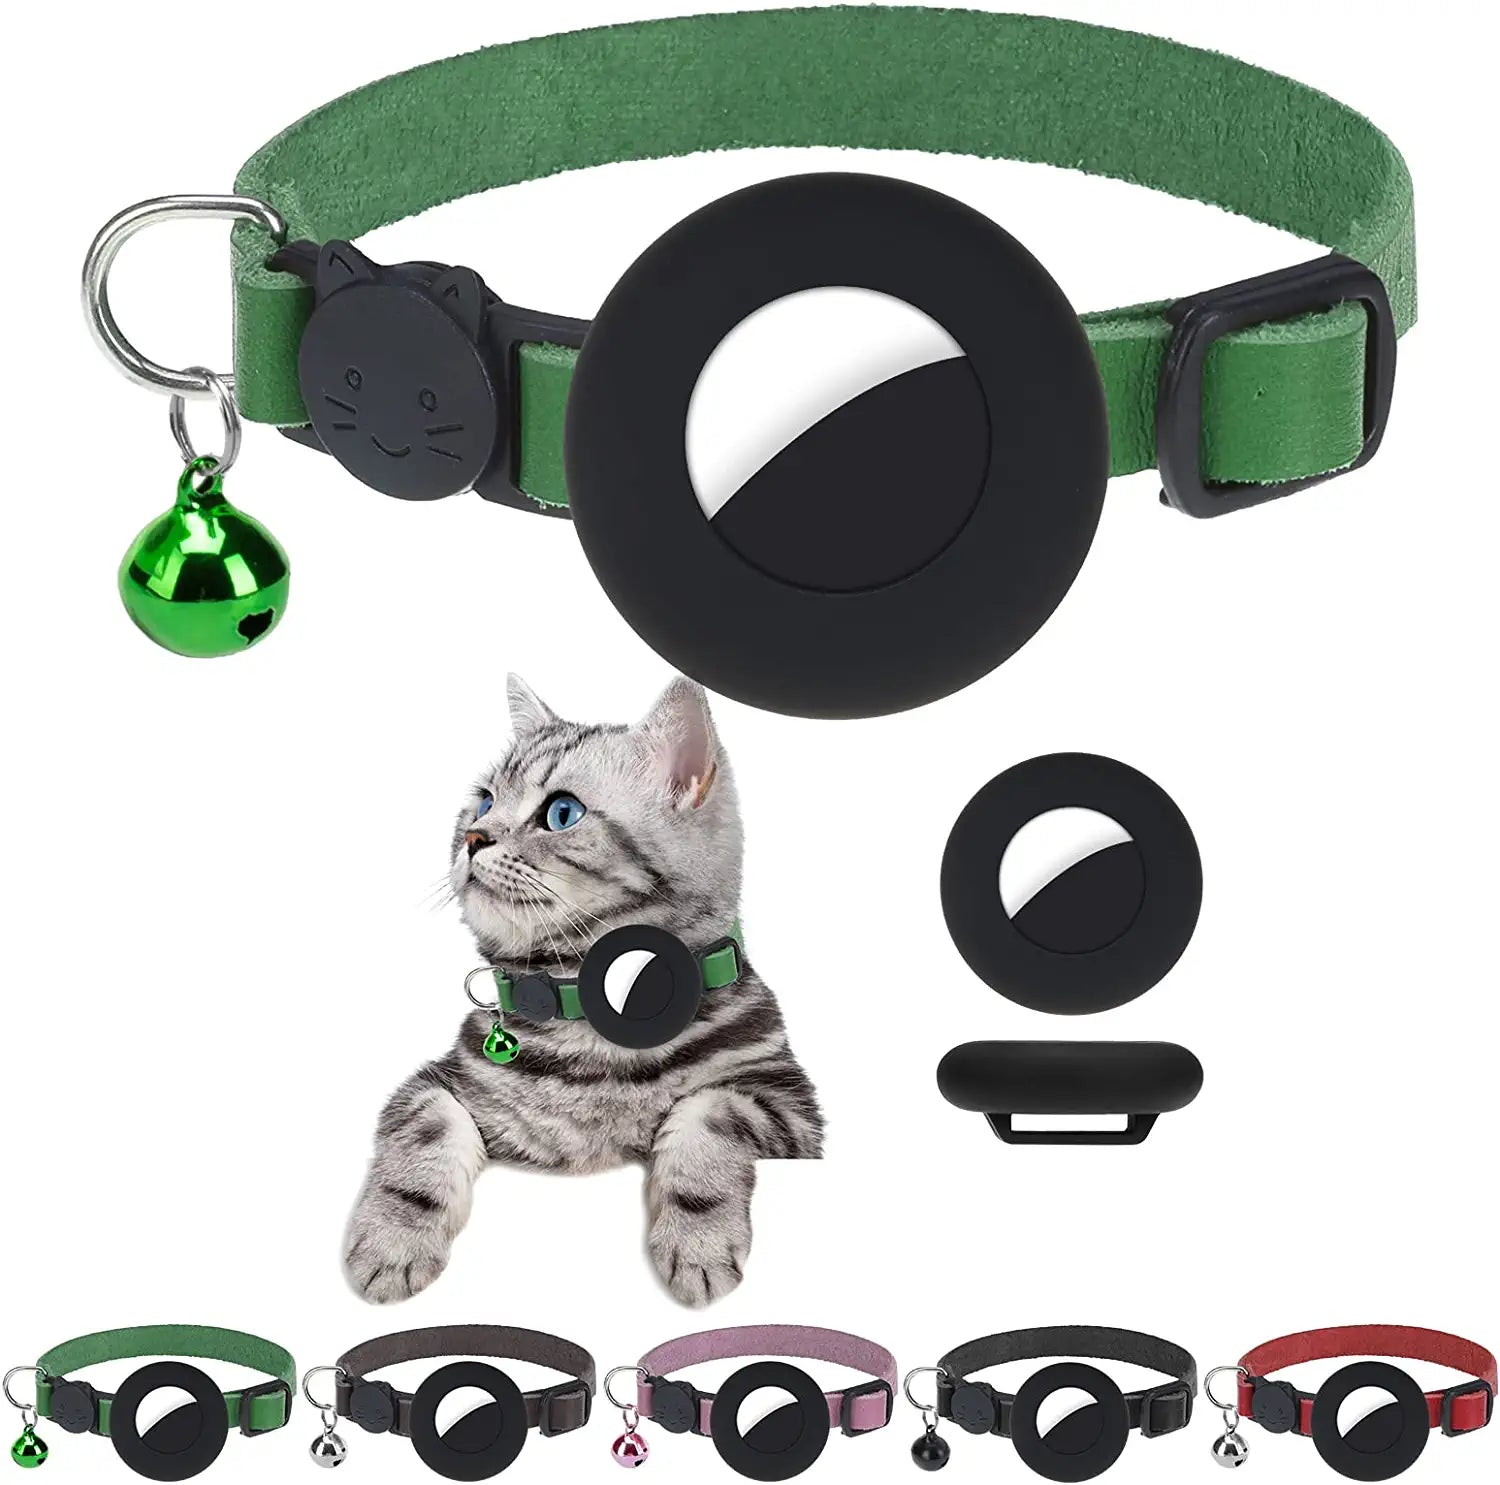 DILLYBUD Airtag Cat Collar Holder 2 Pack Reflective Air Tag Cat Collars Breakaway with Bell, Silicone Waterproof Airtag Case Compatible with Apple Airtag for Small Pets Puppy Kitten Electronics > GPS Accessories > GPS Cases DILLYBUD Olive Green Leather 